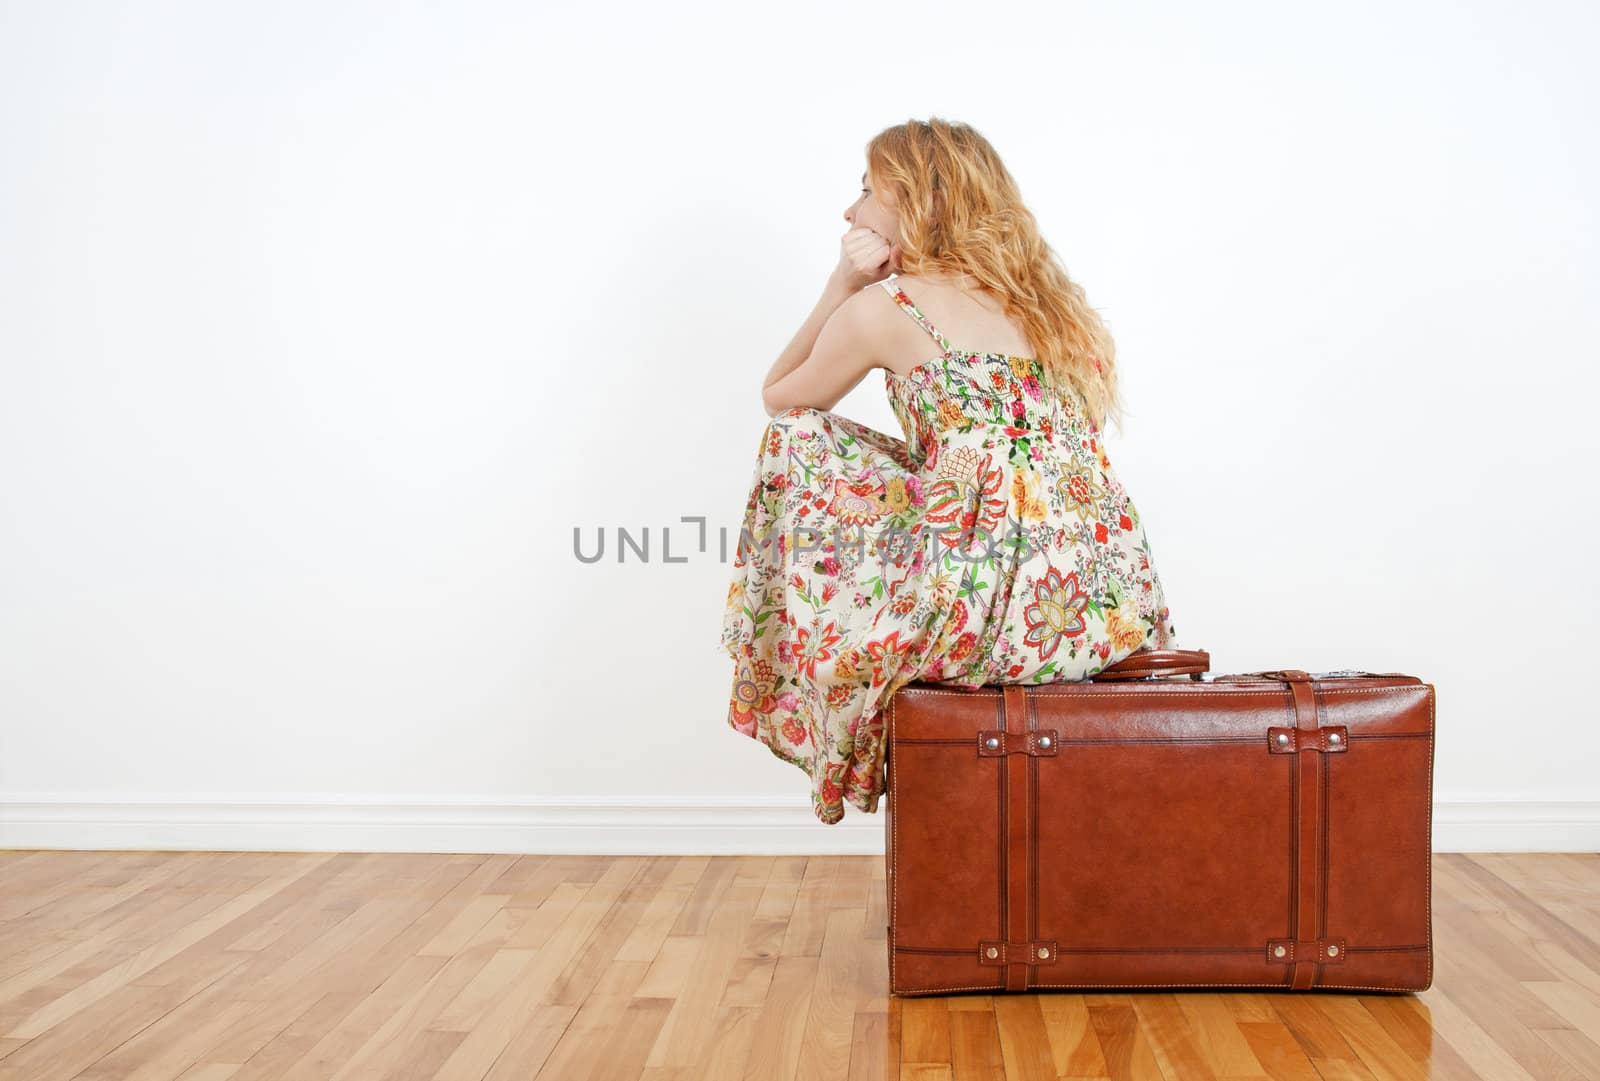 Girl wearing summer dress sits on a vintage suitcase, anticipating travel and waiting.